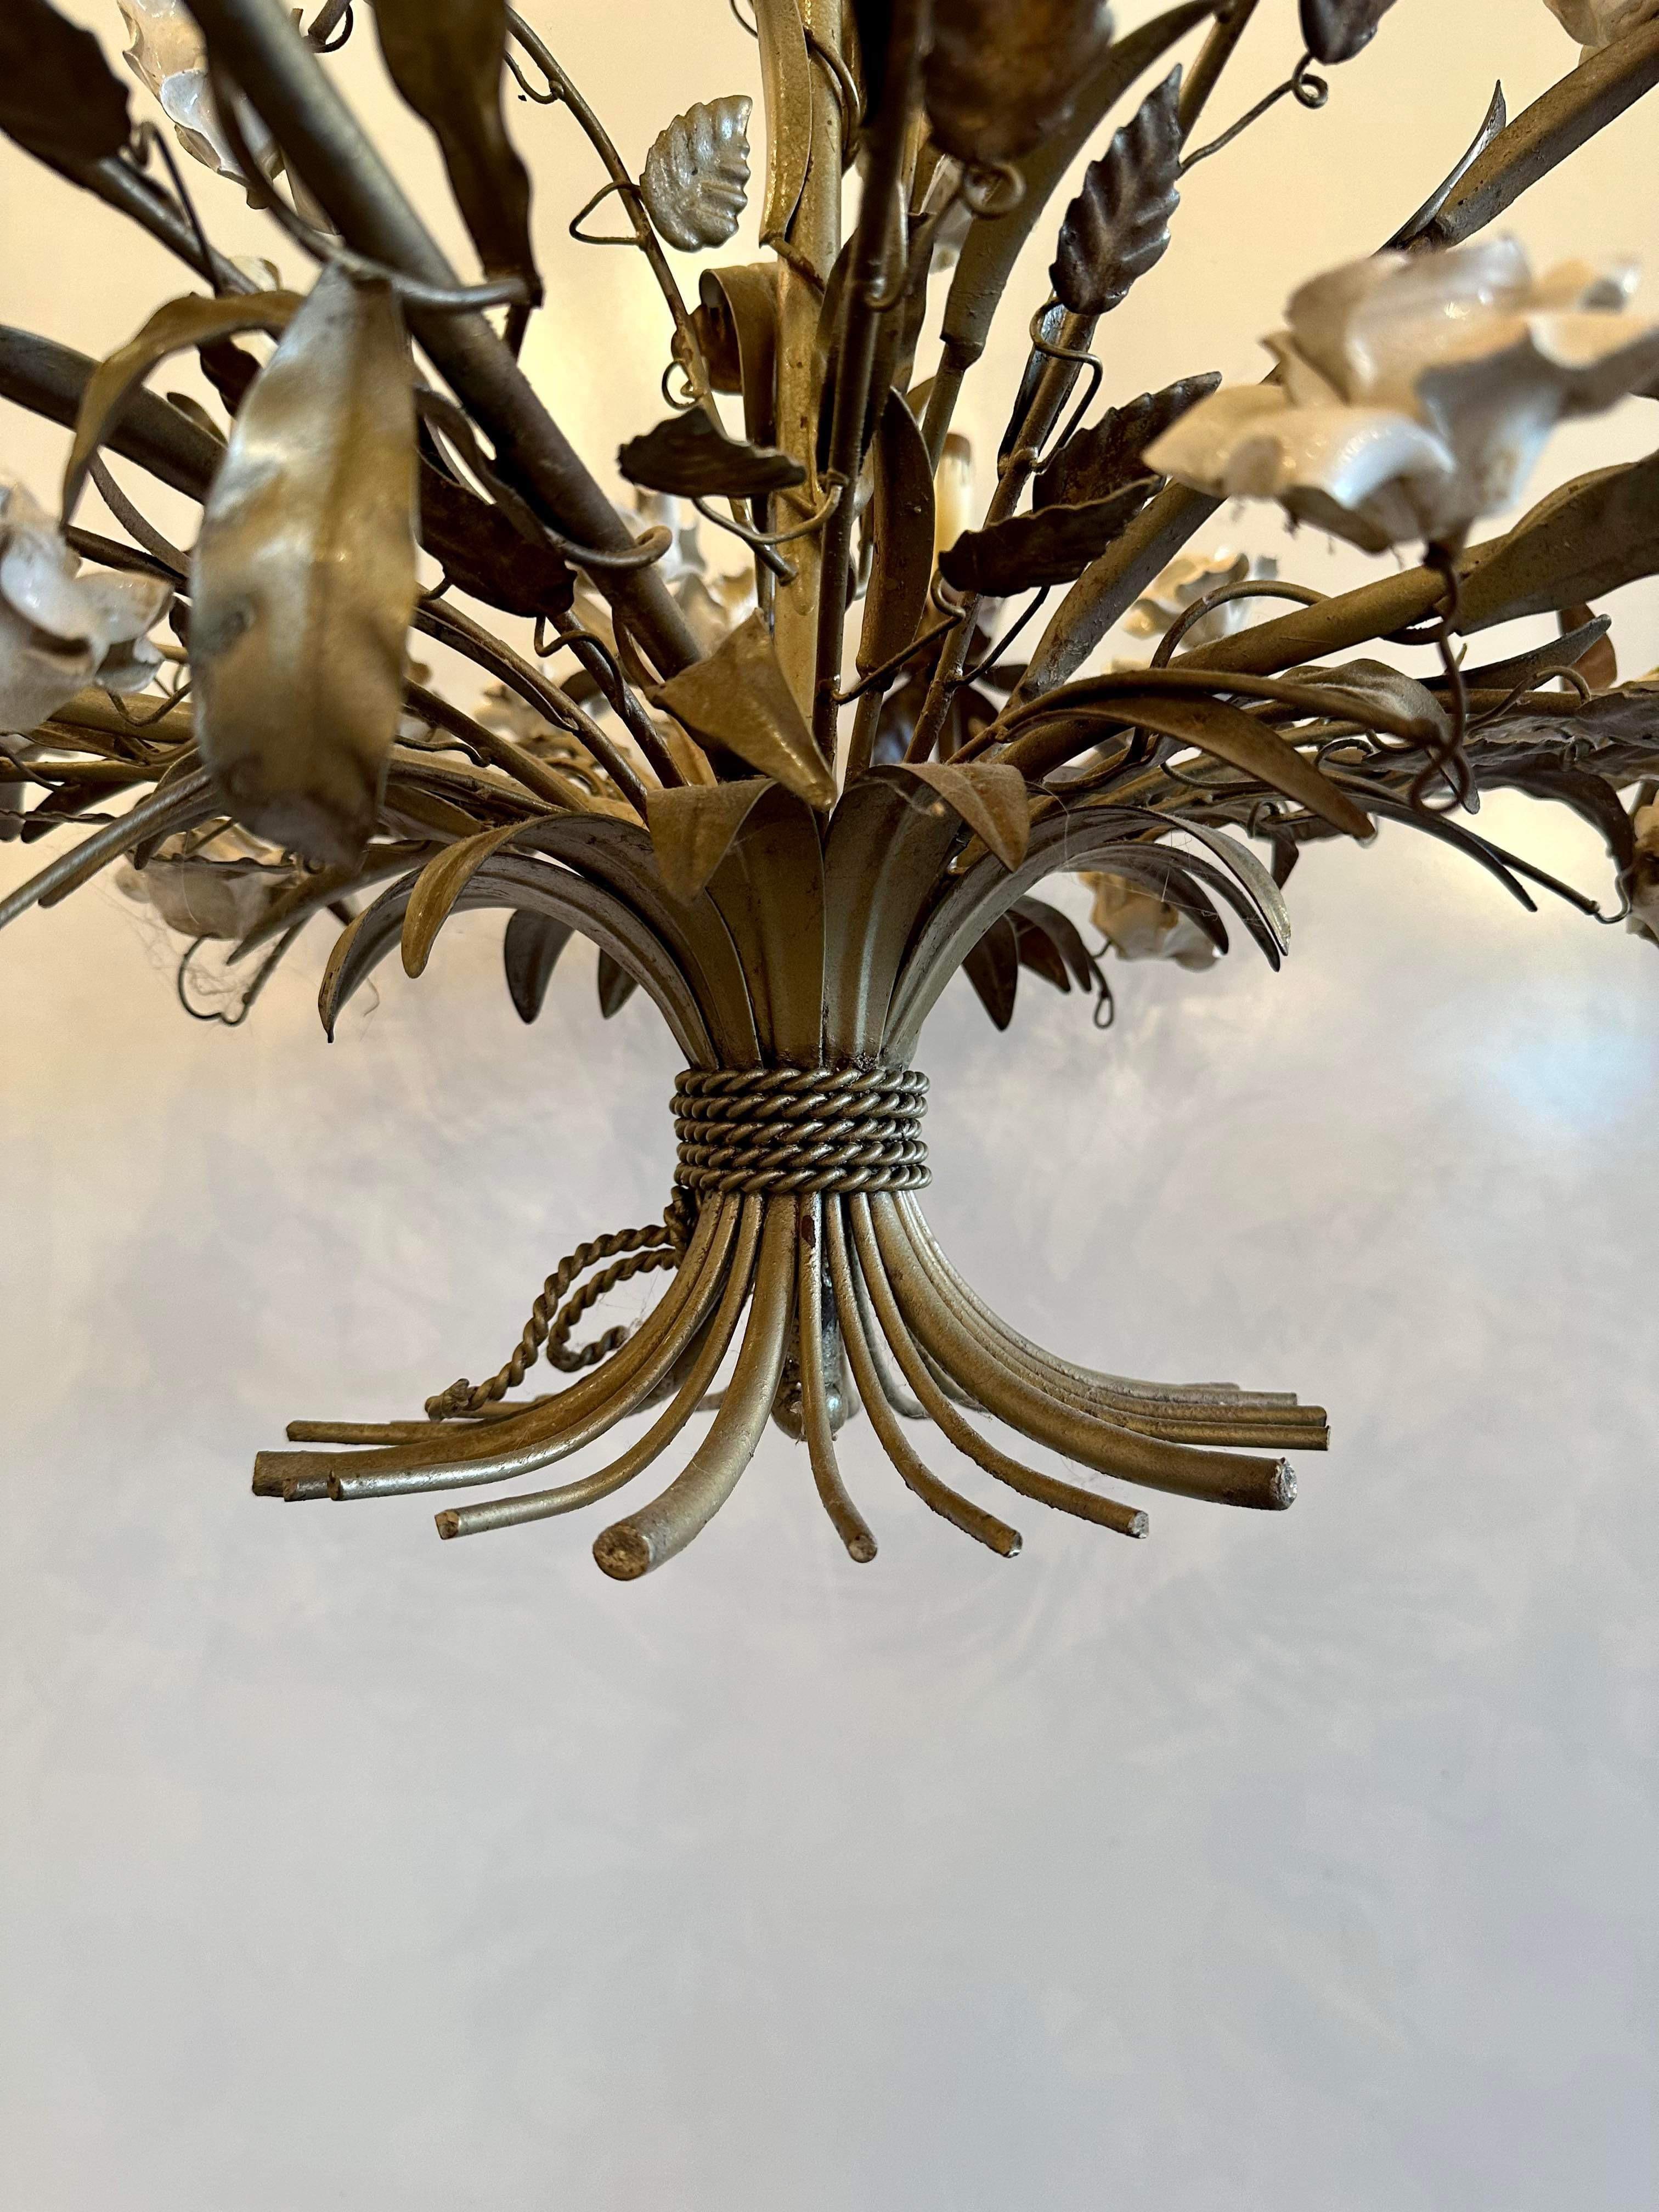 This fixture has character as its own. Amazing detail in the roses to capture the elegance 